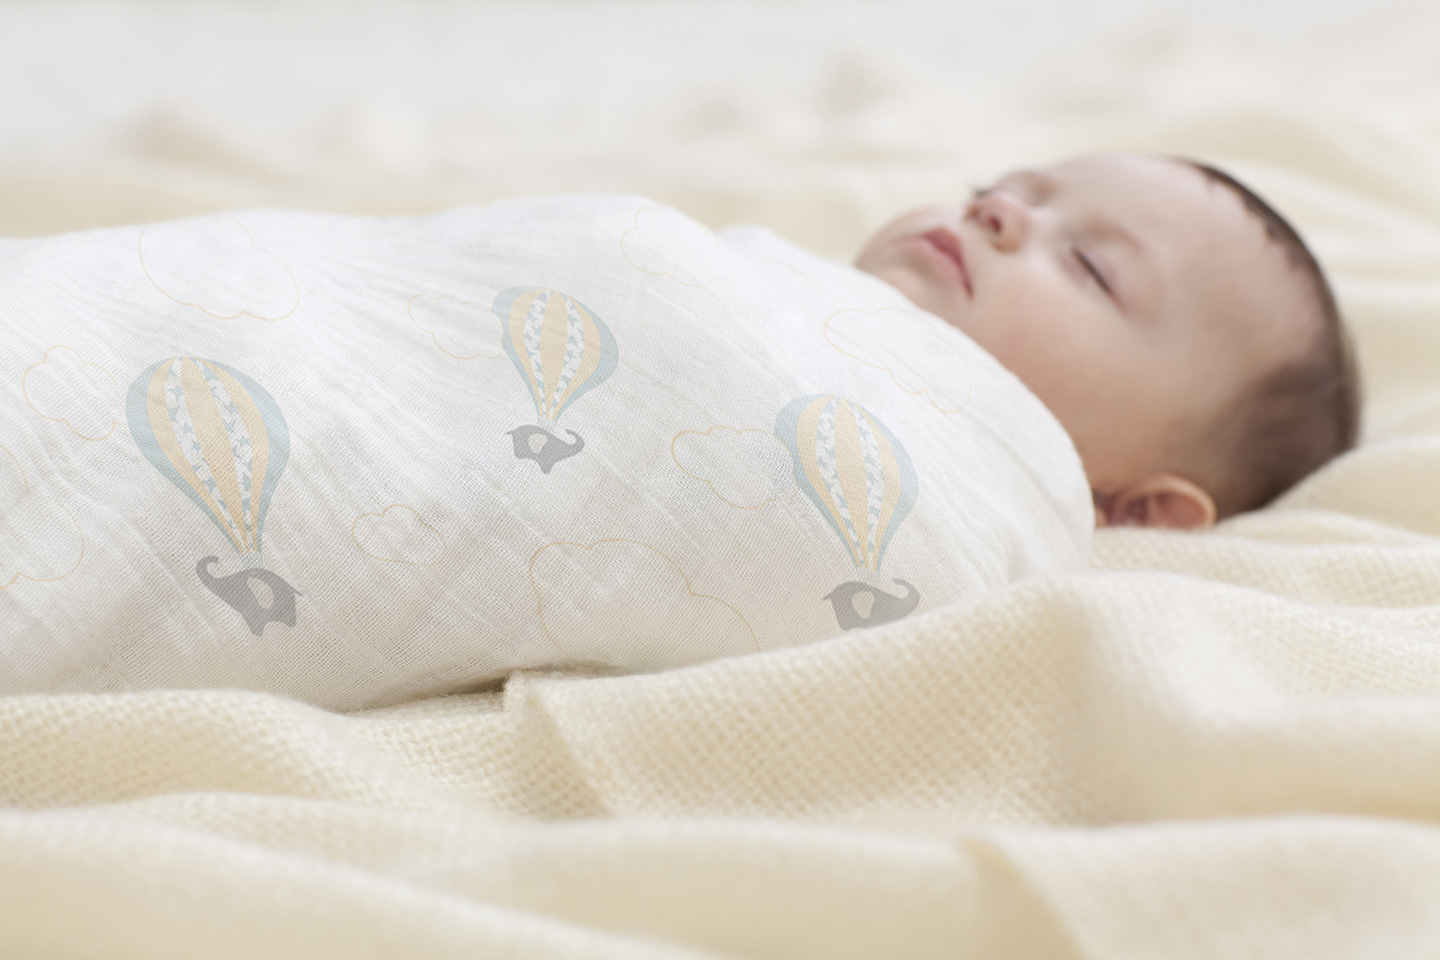 Organic swaddle blankets from Aden + Anais join with the The Honest Co., and babies everywhere fall to sleep in style